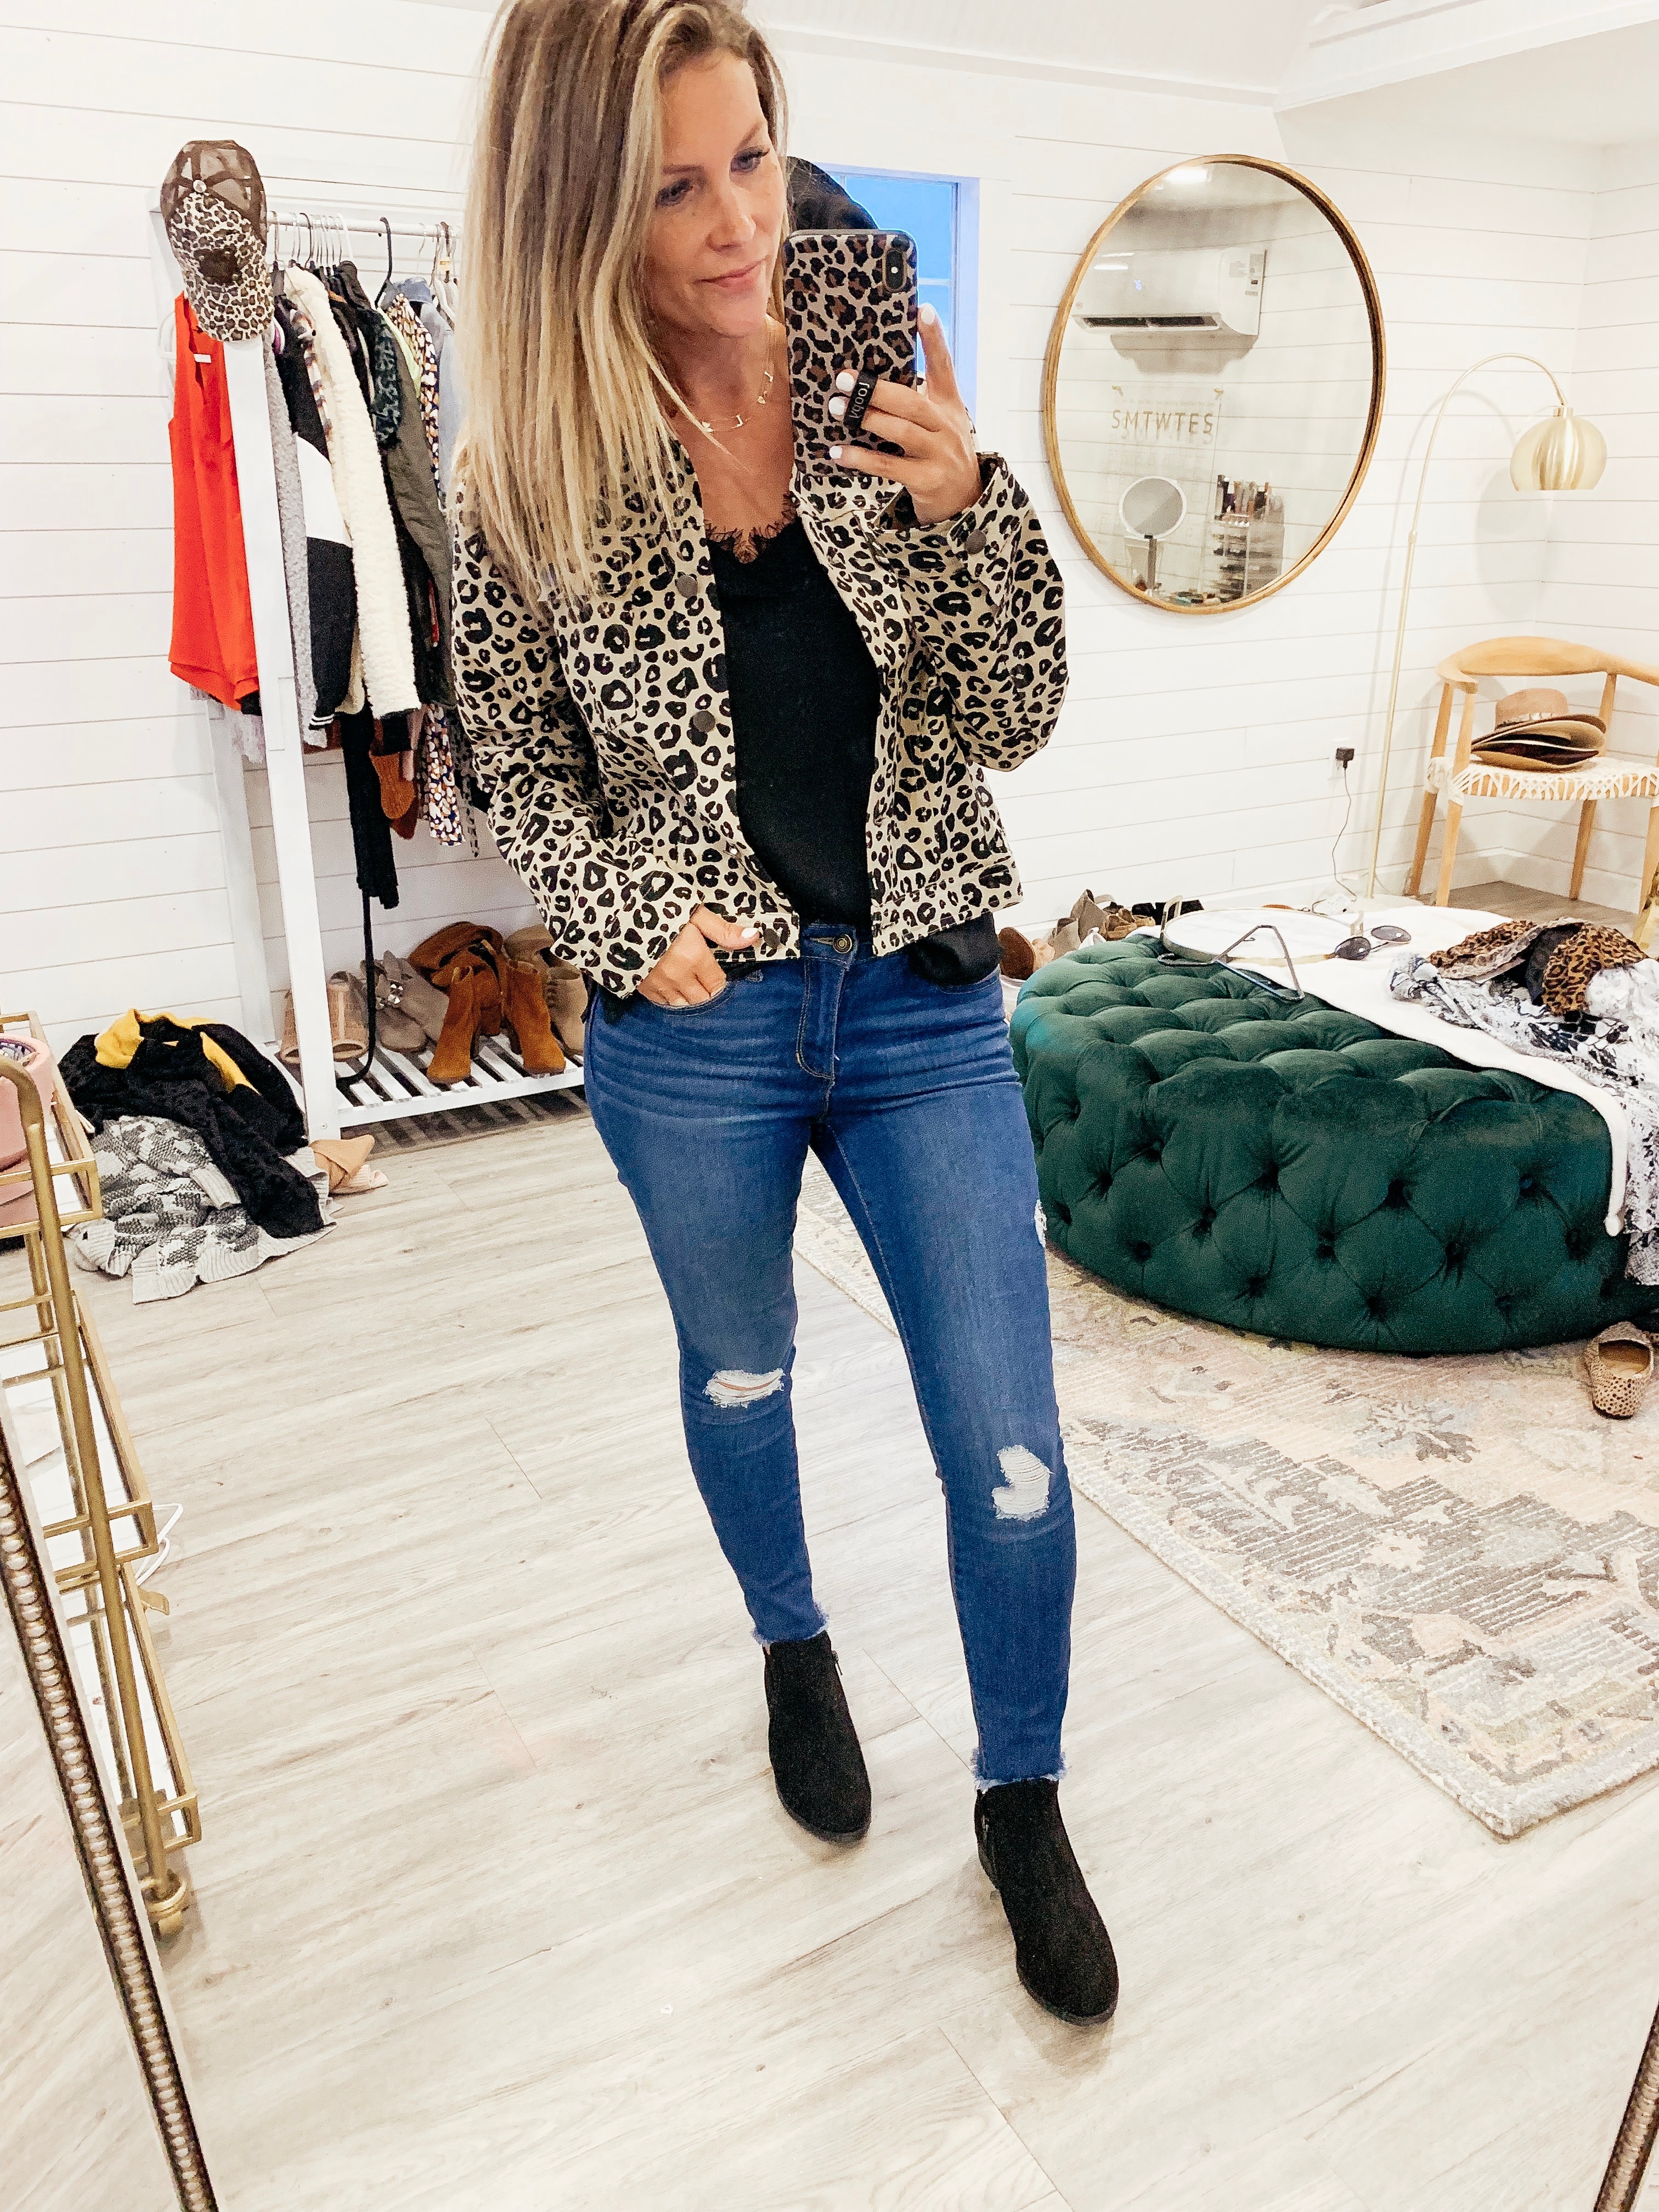 Life & Style Blogger Ashle Nichols shares her favorite fall fashion trends from Walmart that are versatile and affordable.